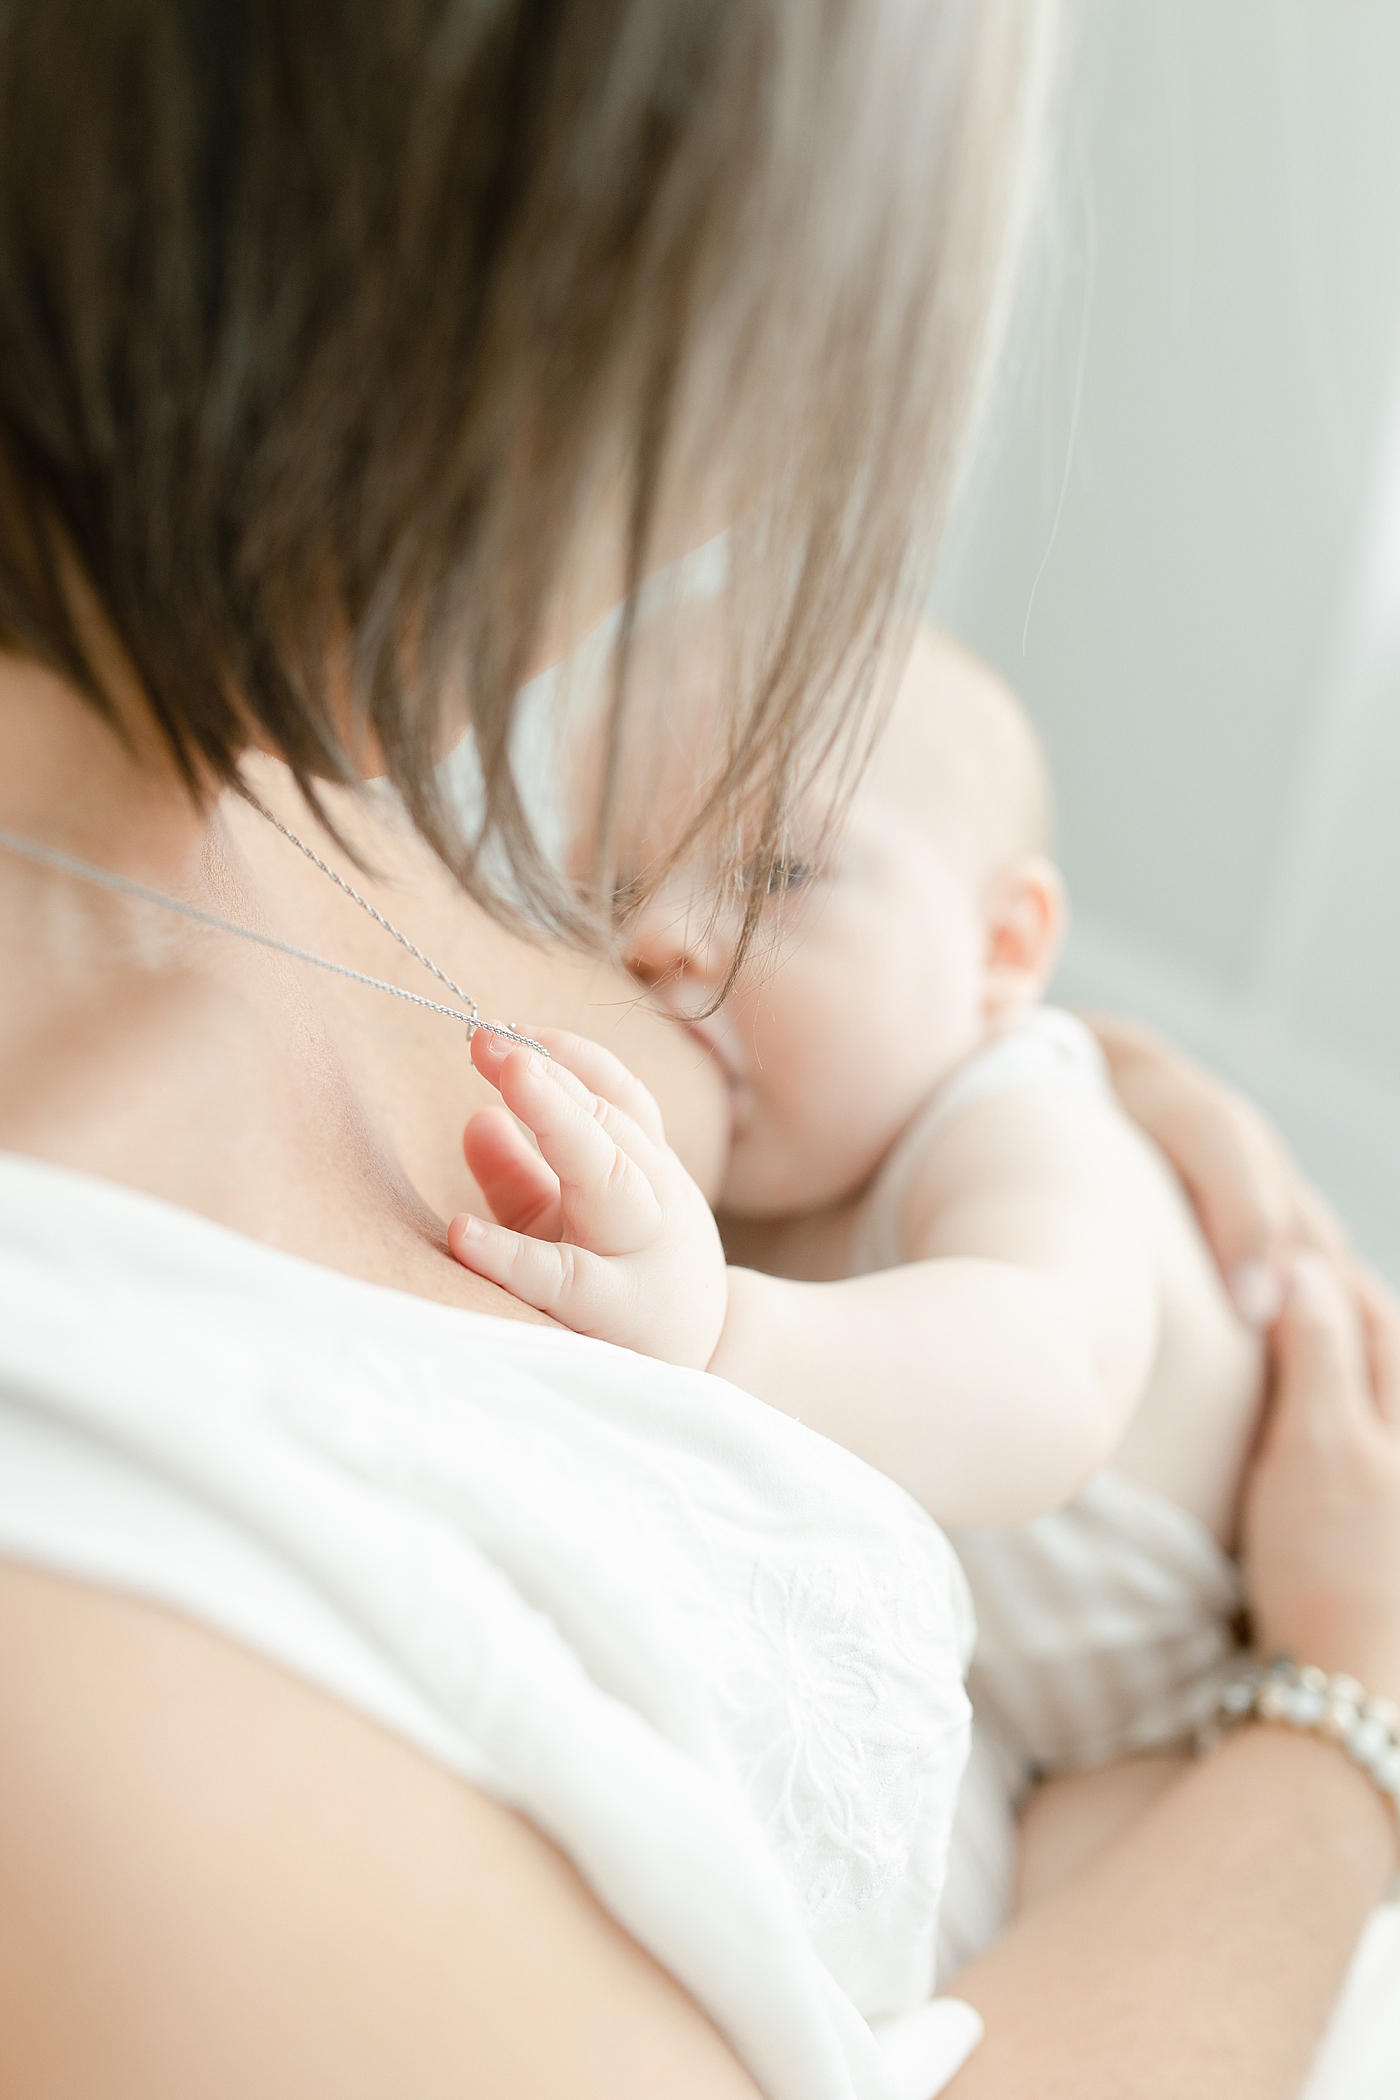 Baby holding mom's necklace while he nurses | Photo by Hattiesburg Baby Photographer Little Sunshine Photography